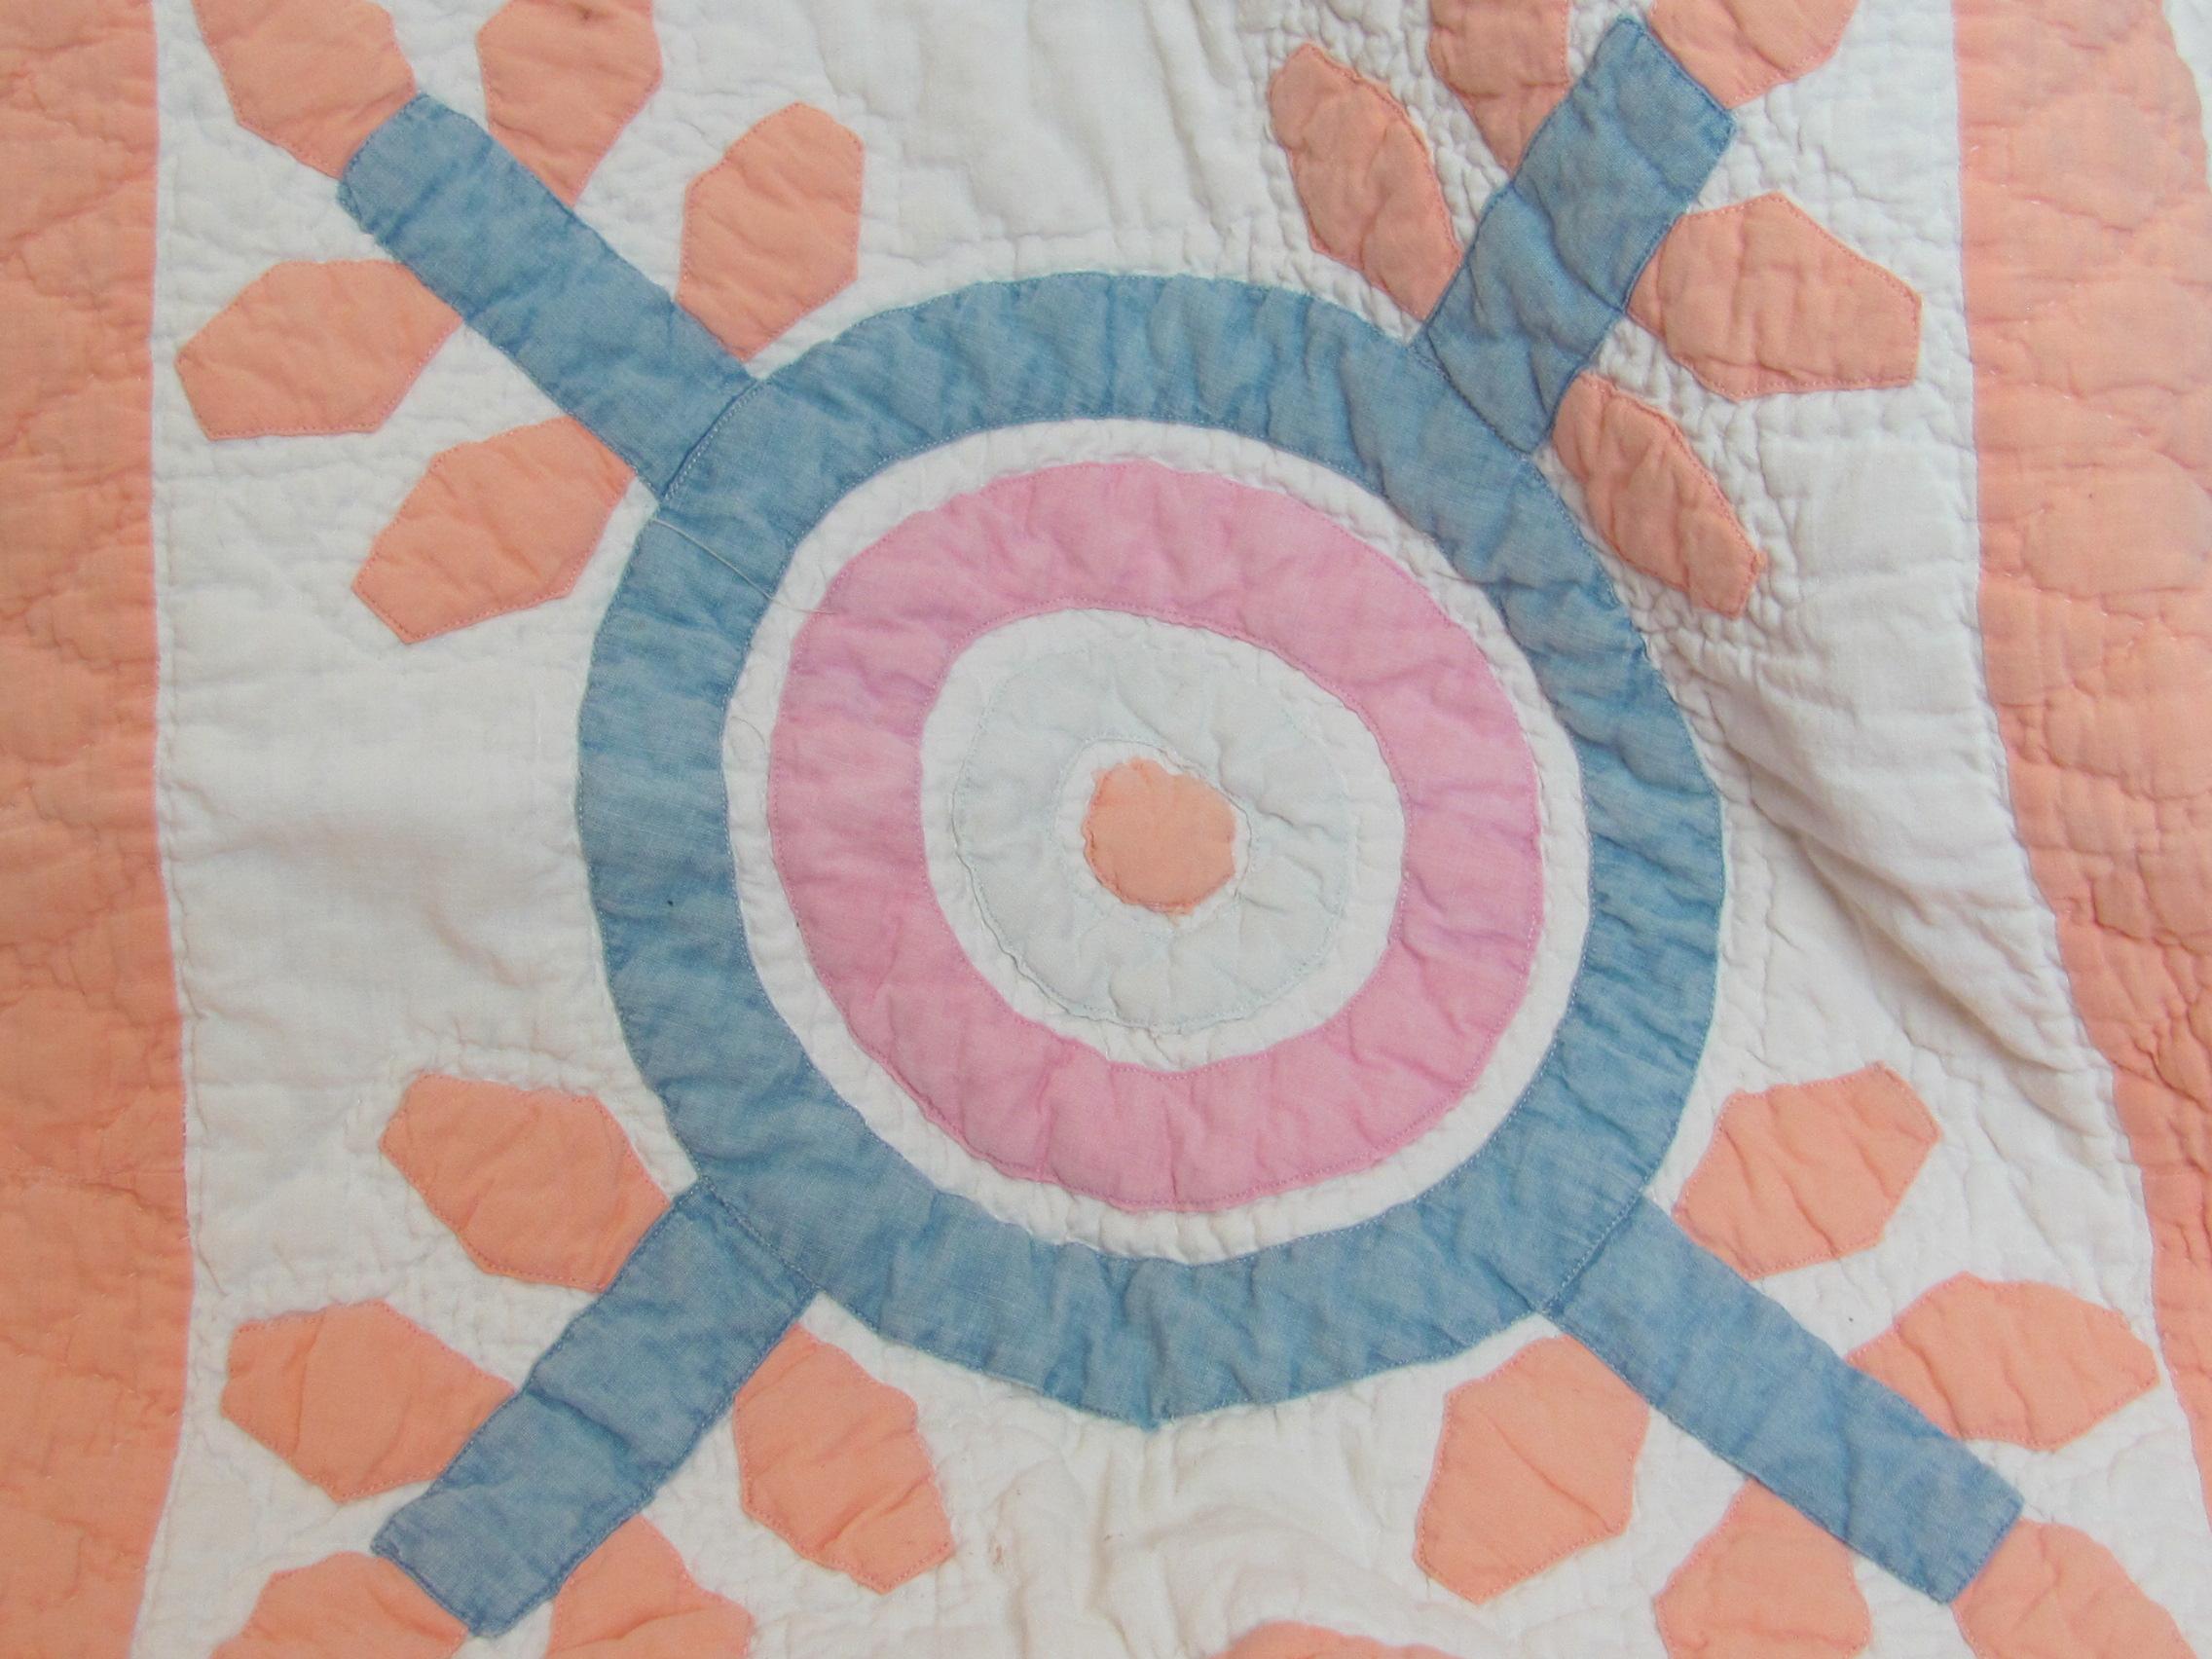 Handmade Quilt – Peach with Pastel Colors – Measures 68” x 80” - Some wear & tear